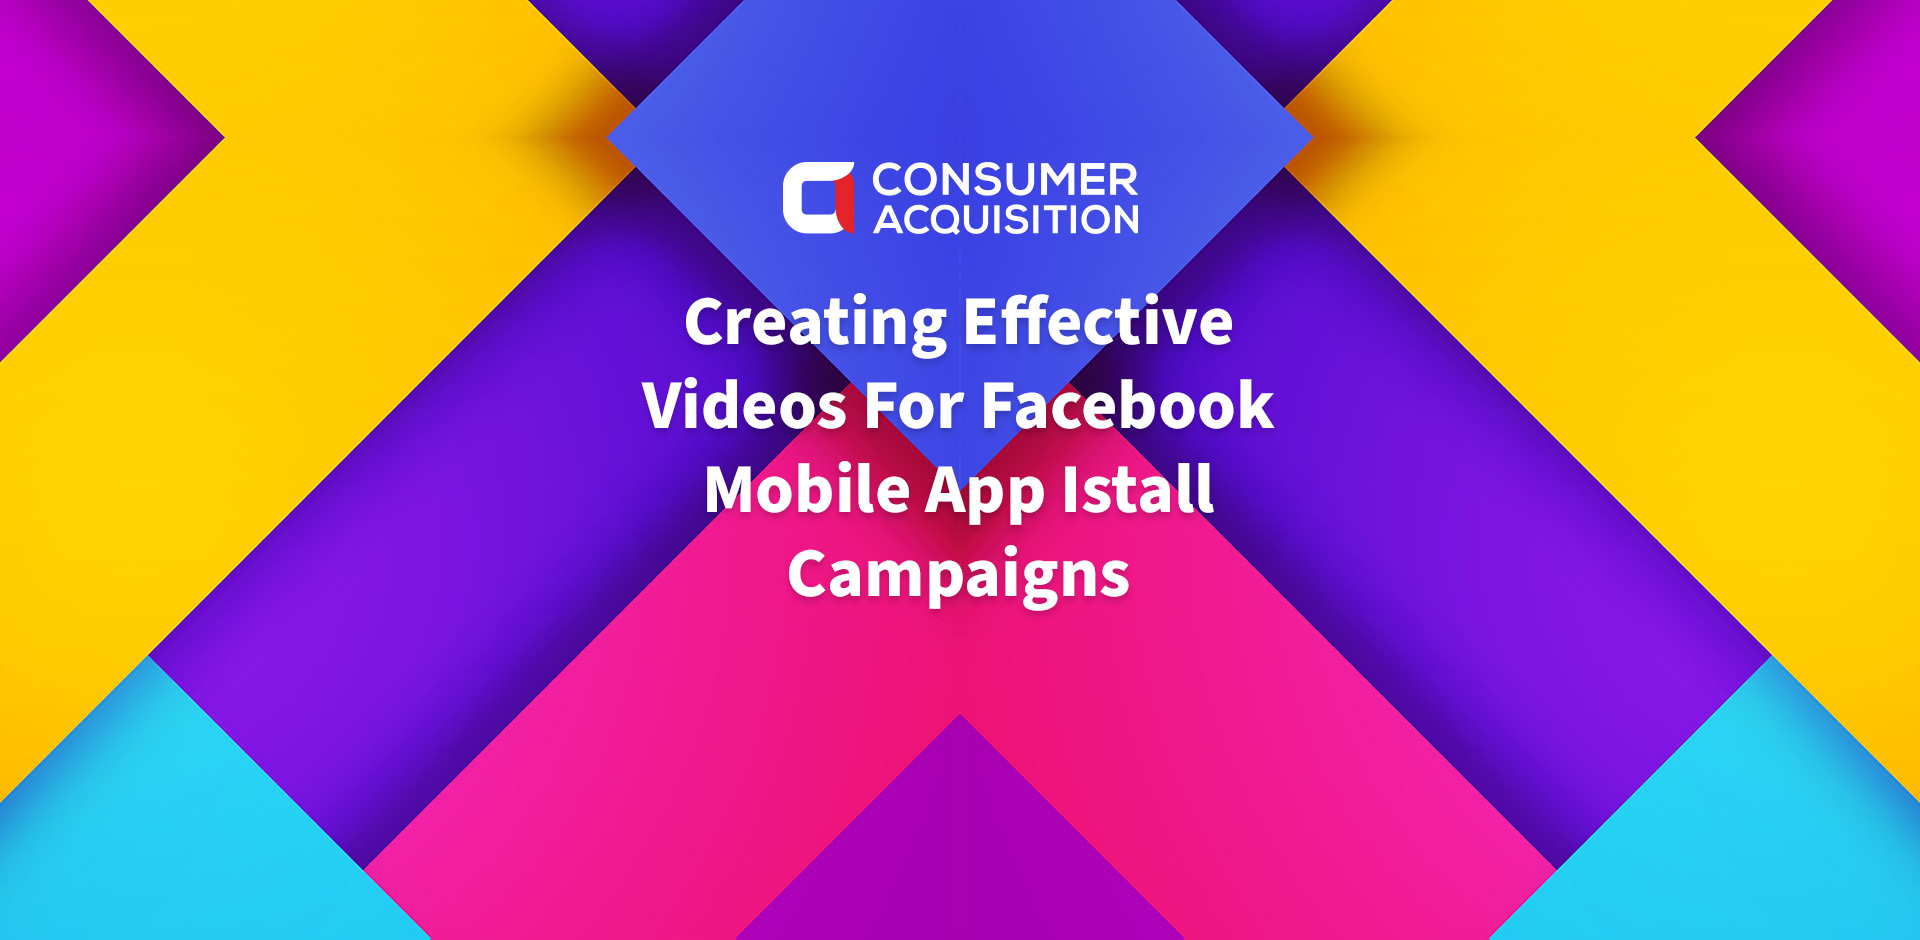 Creating Effective Videos For Facebook Mobile App Install Campaigns